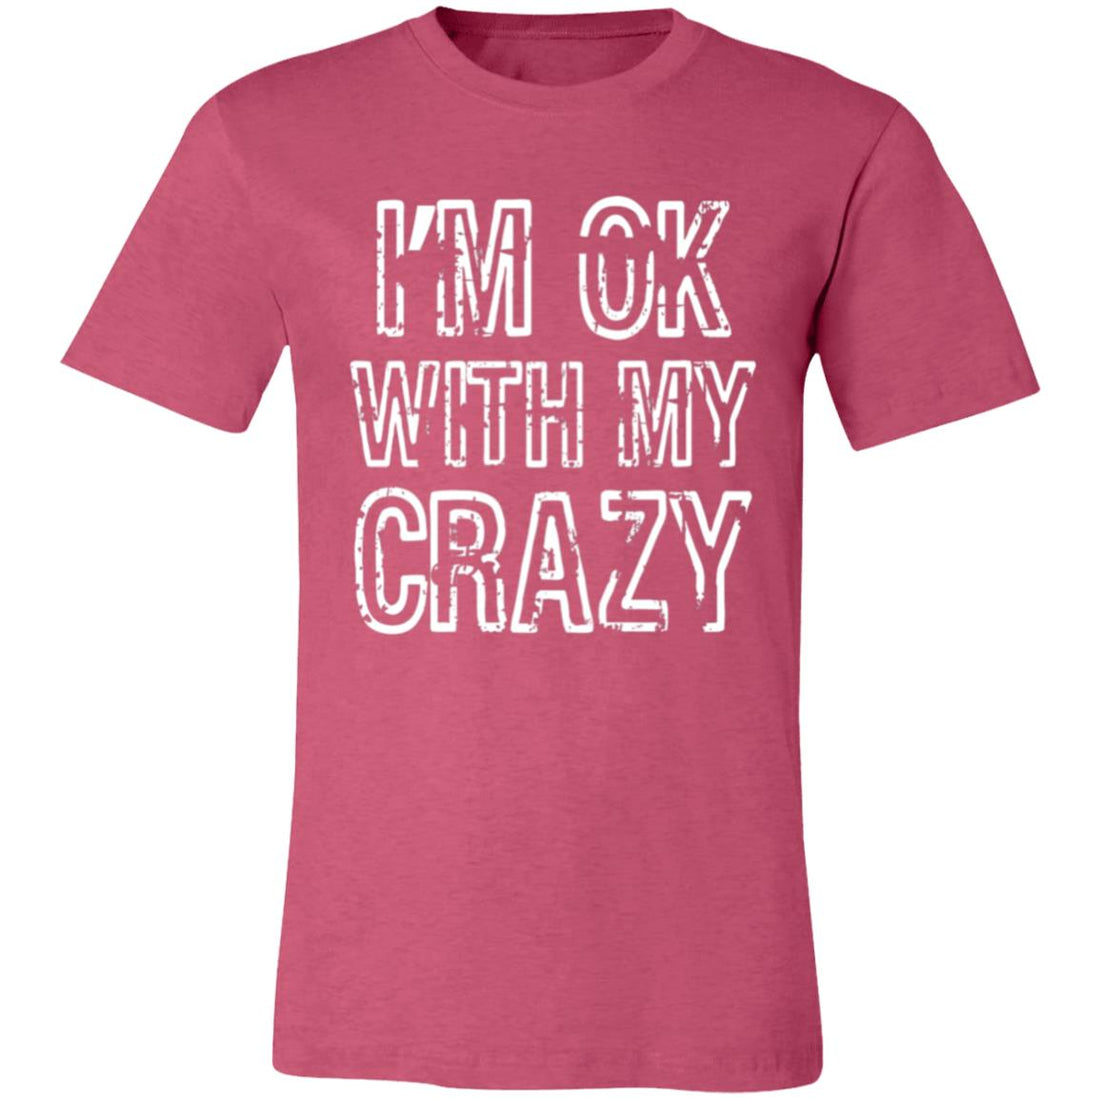 OK With My Crazy Unisex Jersey Short-Sleeve T-Shirt - T-Shirts - Positively Sassy - OK With My Crazy Unisex Jersey Short-Sleeve T-Shirt